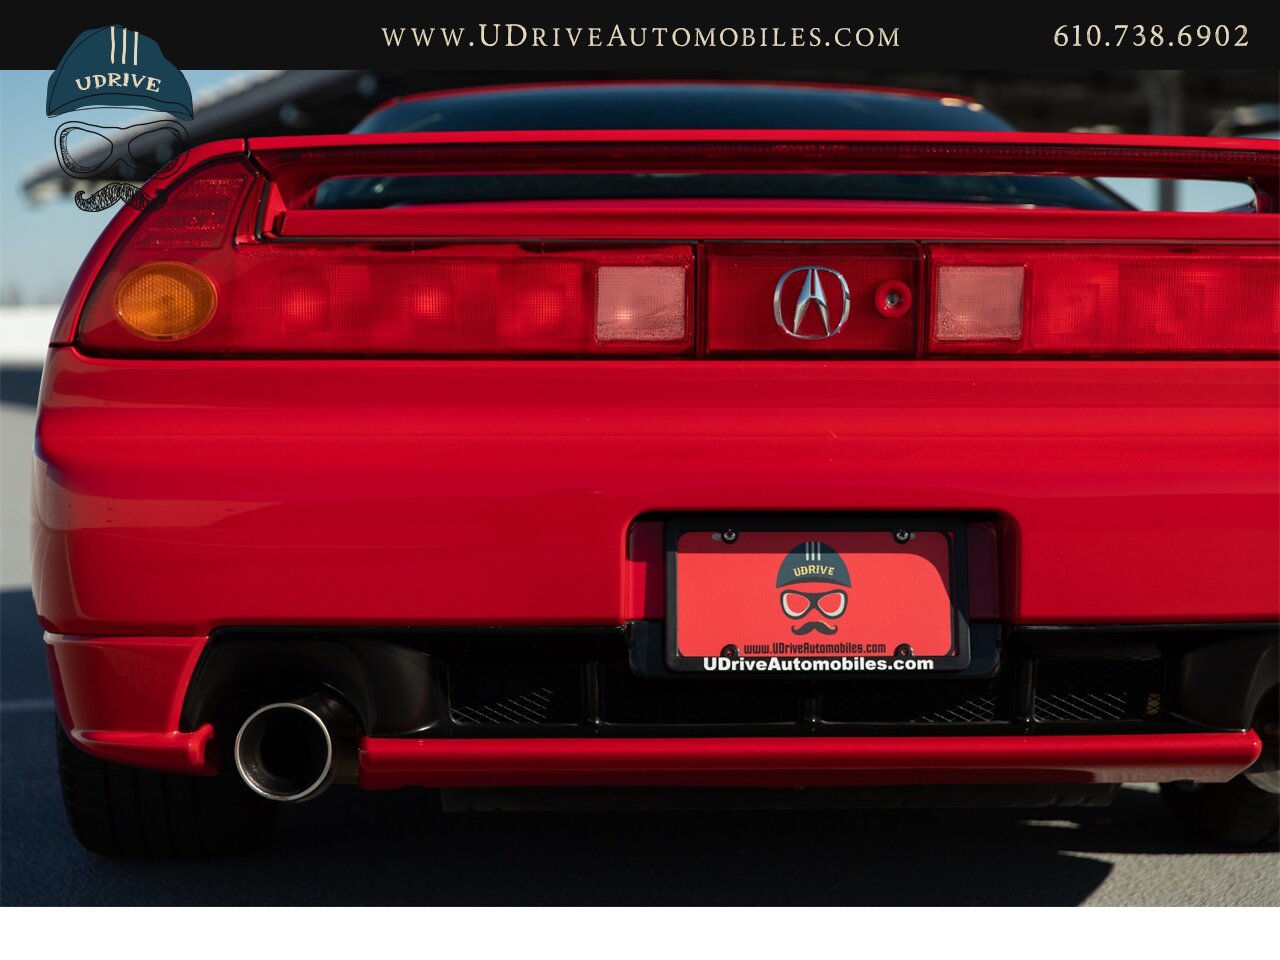 2004 Acura NSX NSX-T 21k mIles Red over Black  Fresh Timing Belt Service - Photo 21 - West Chester, PA 19382